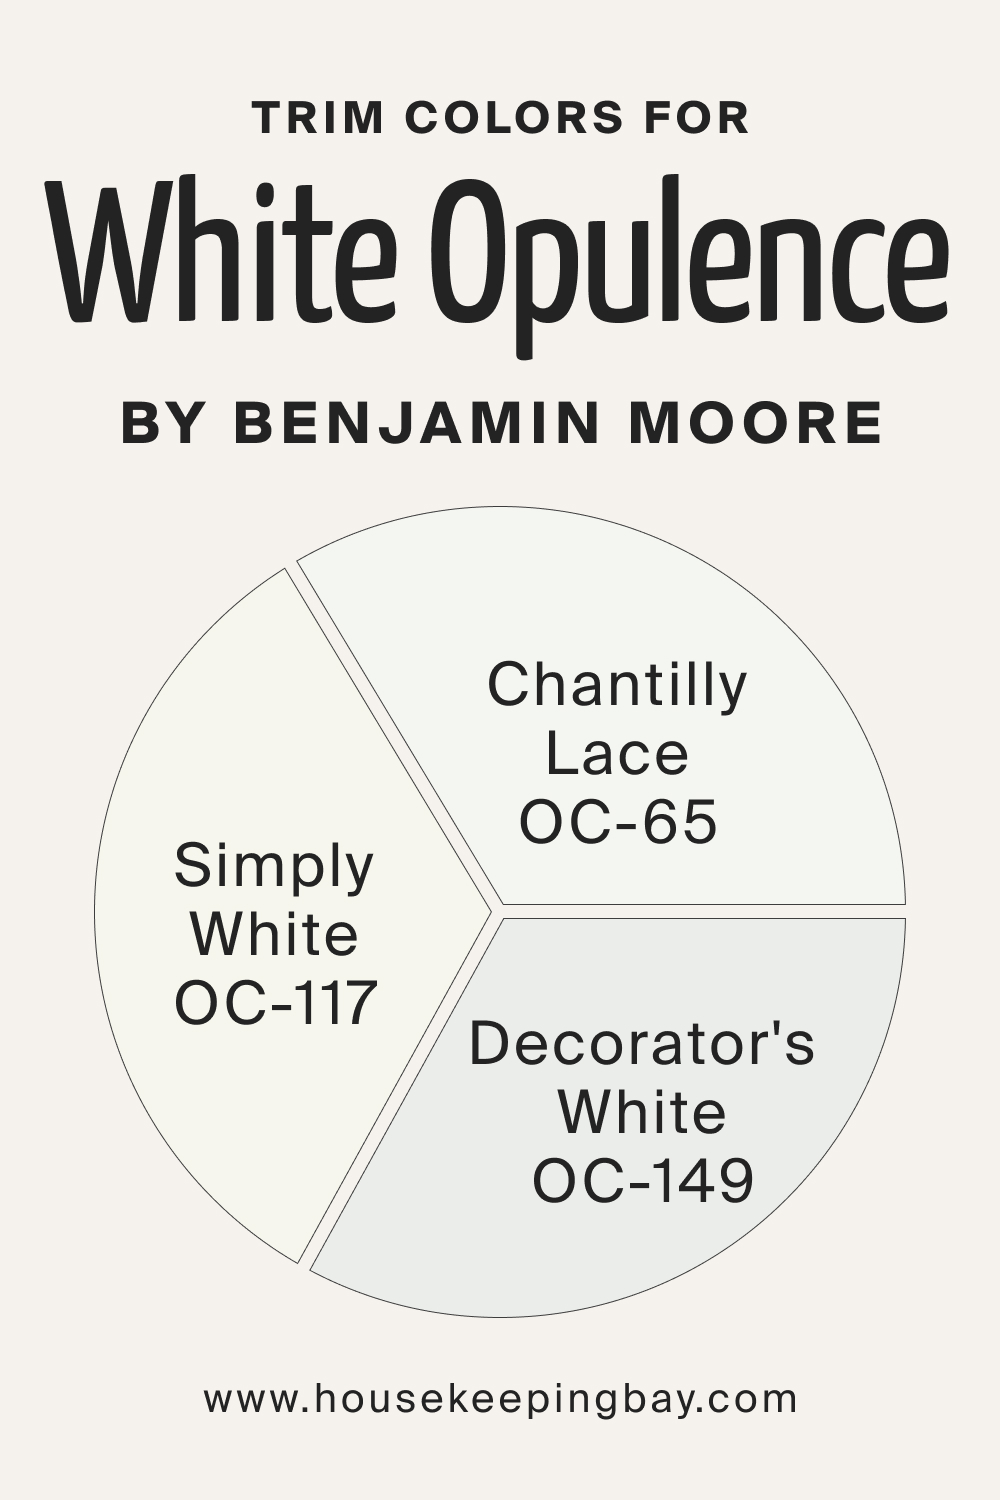 Trim Color for White Opulence OC 69 by Benjamin Moore